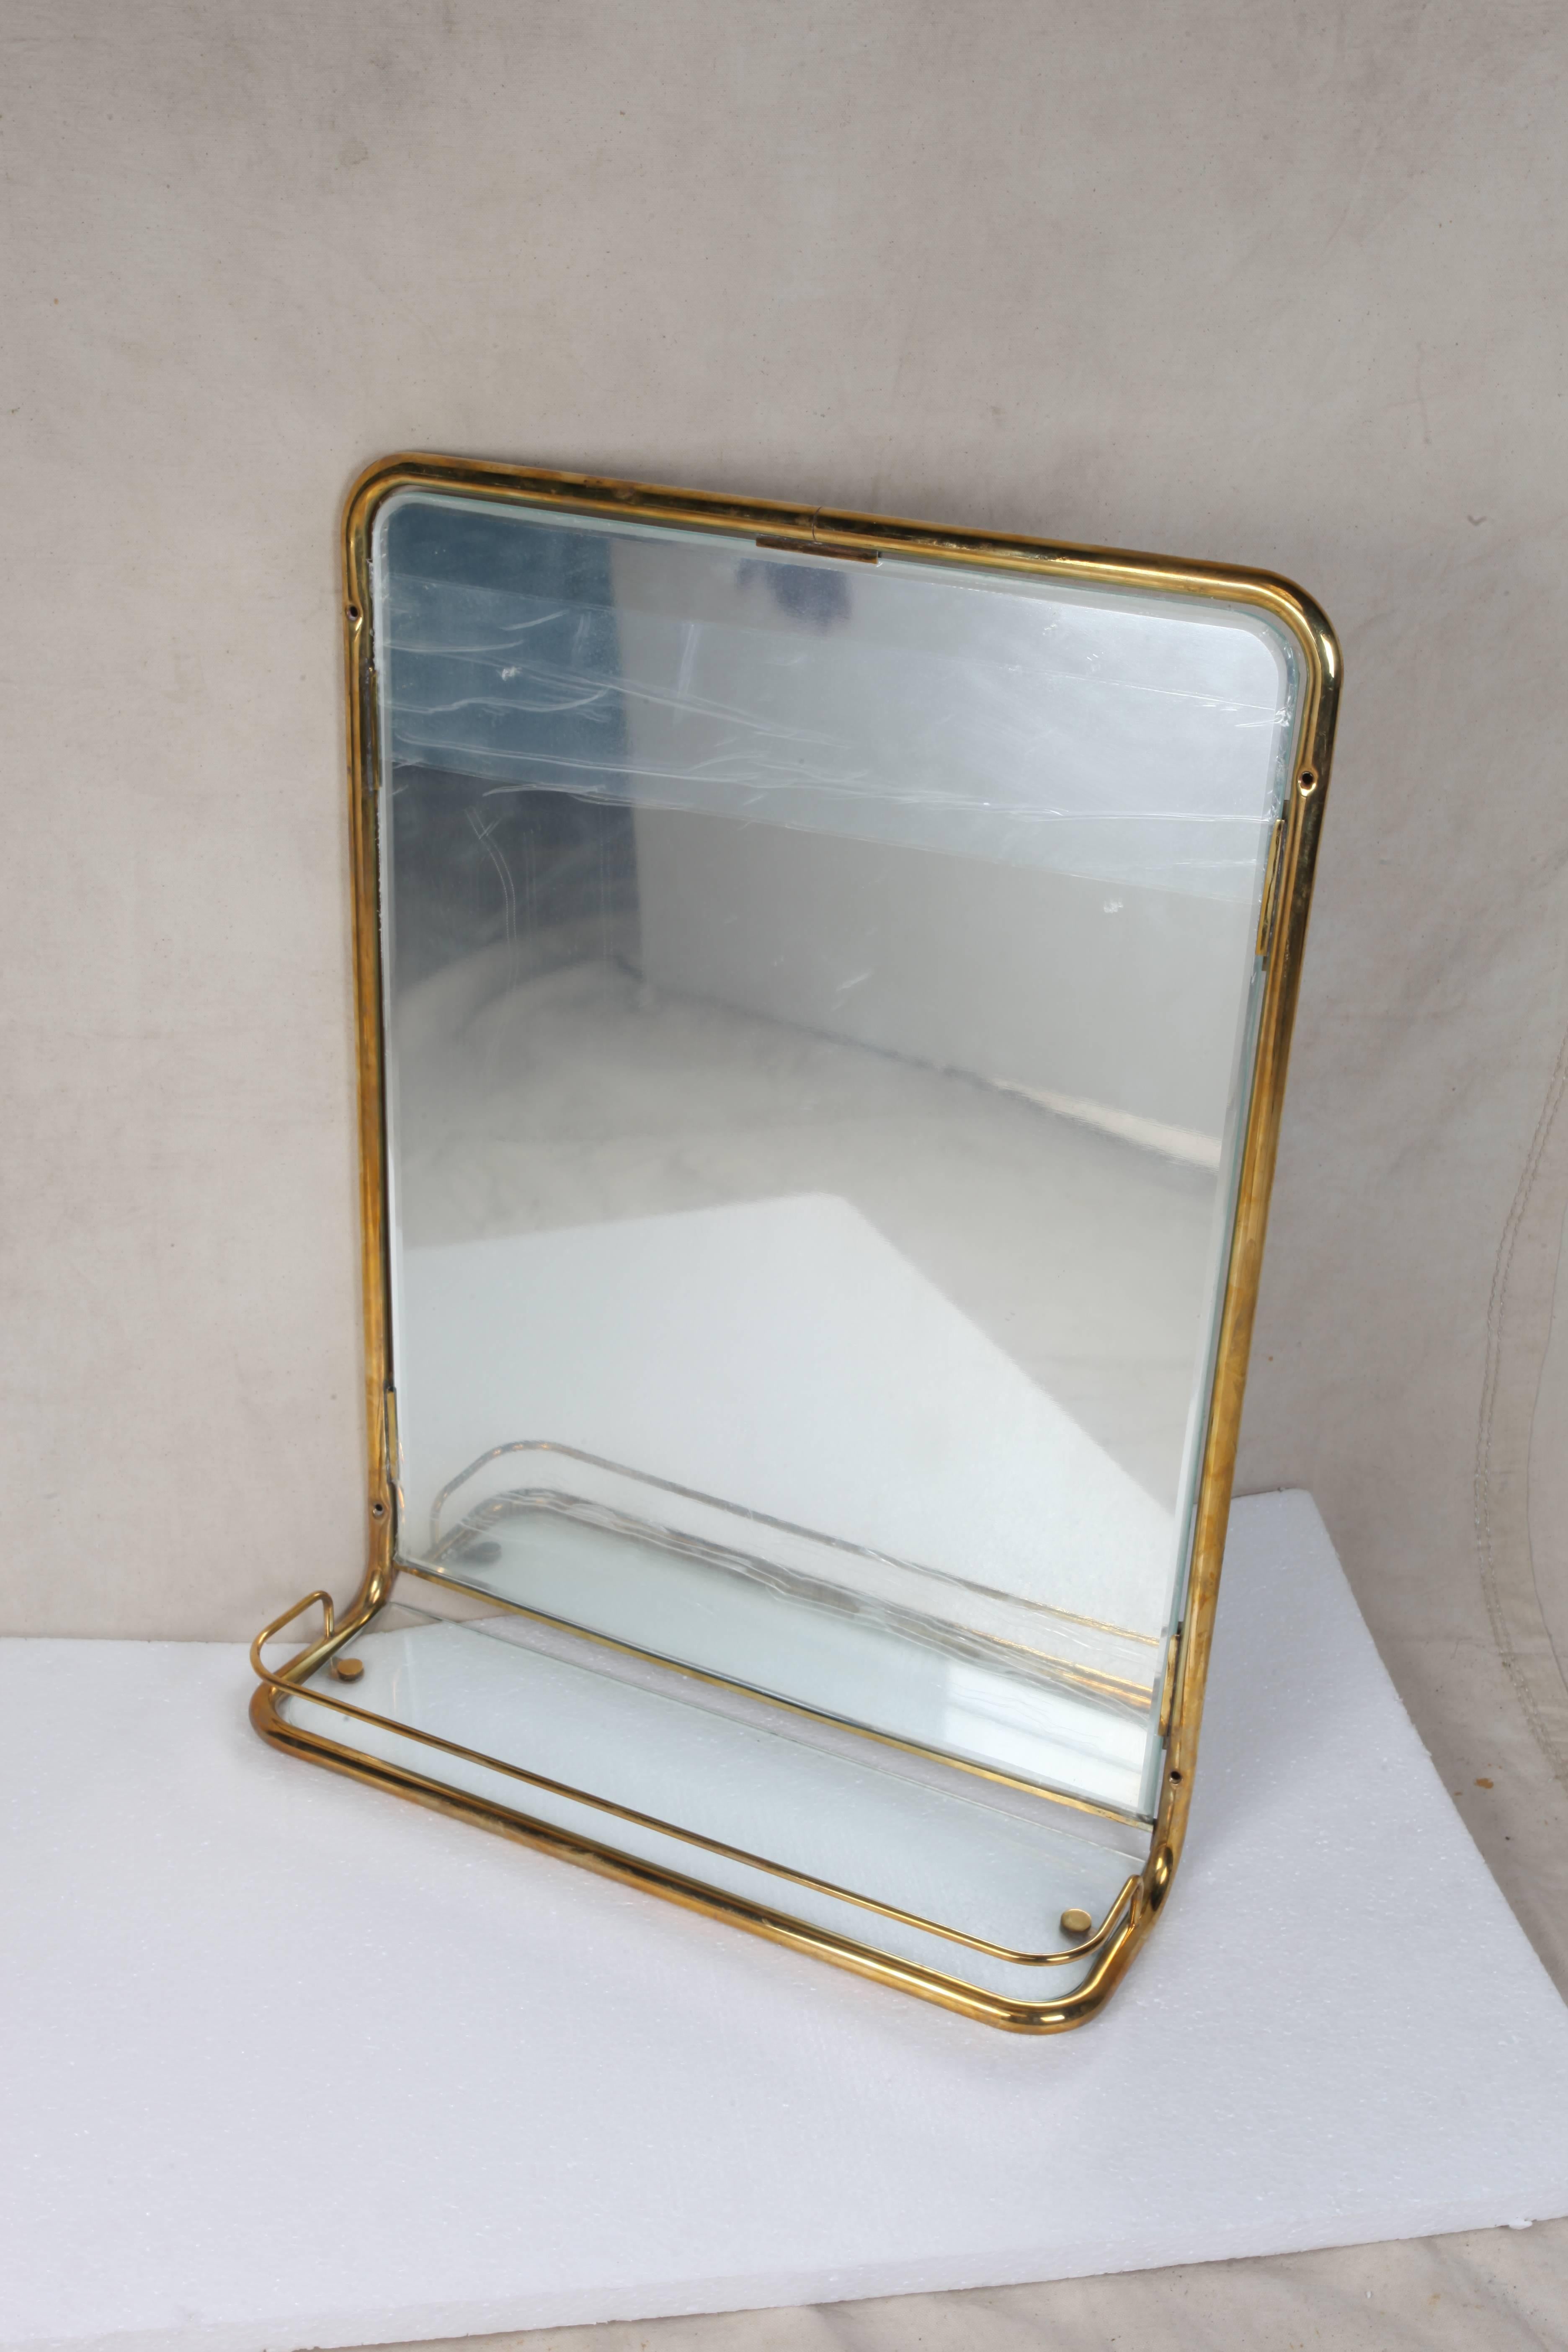 A great brass wall mirror from the stateroom of a decommissioned cruise ship. Features a new mirror and glass shelf with the original brass railing around it, circa 1960s. When found, these had been slathered with old white paint and all the glass